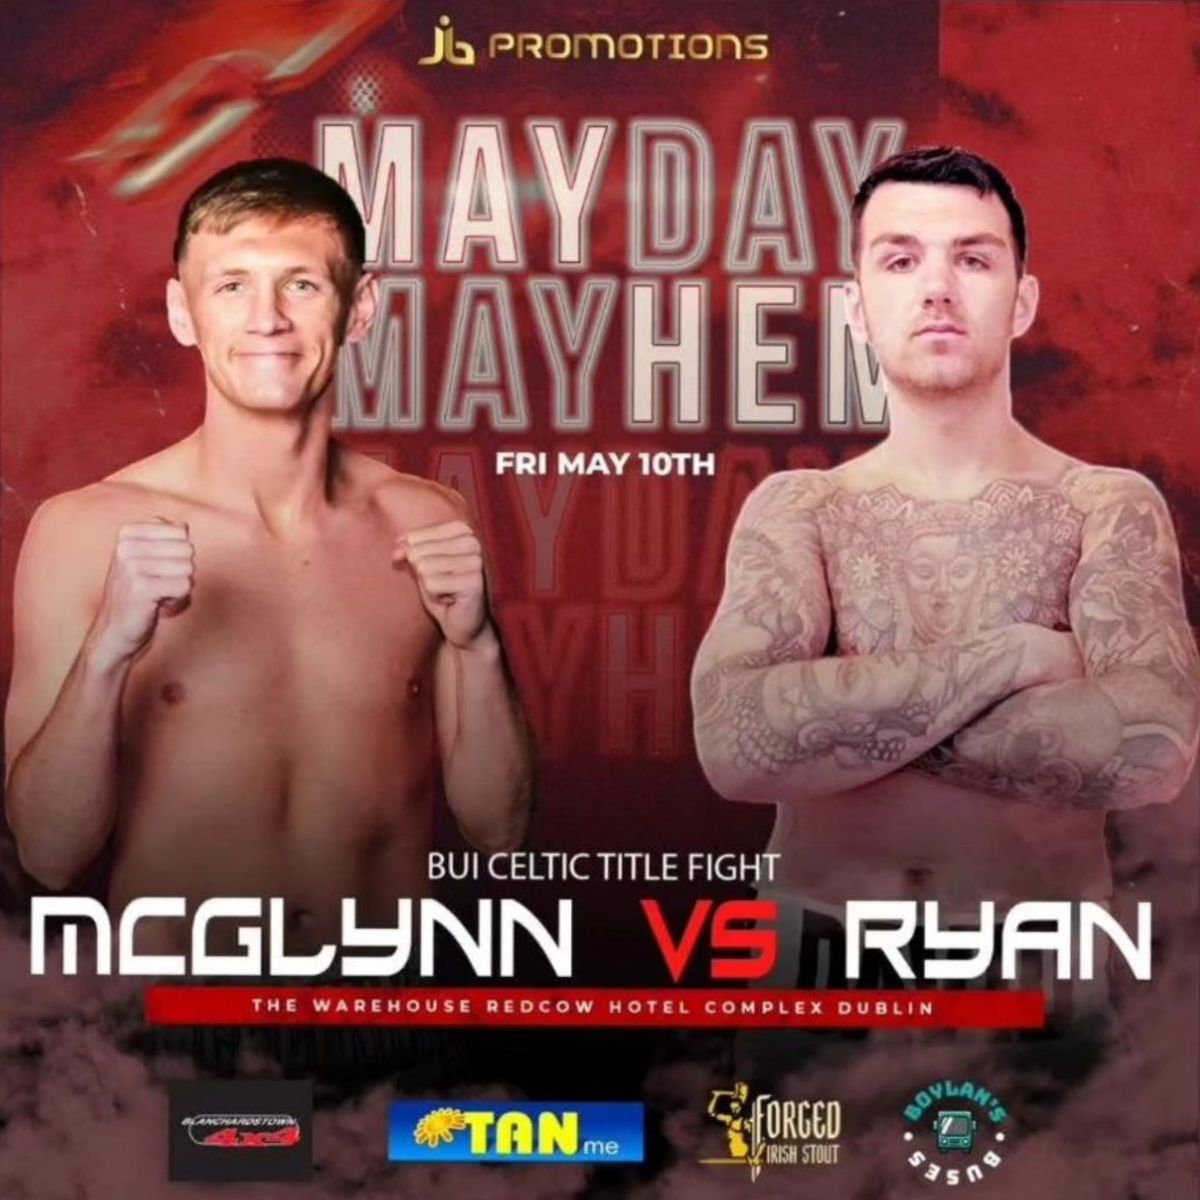 JB Promotions presents "Mayday Madness"